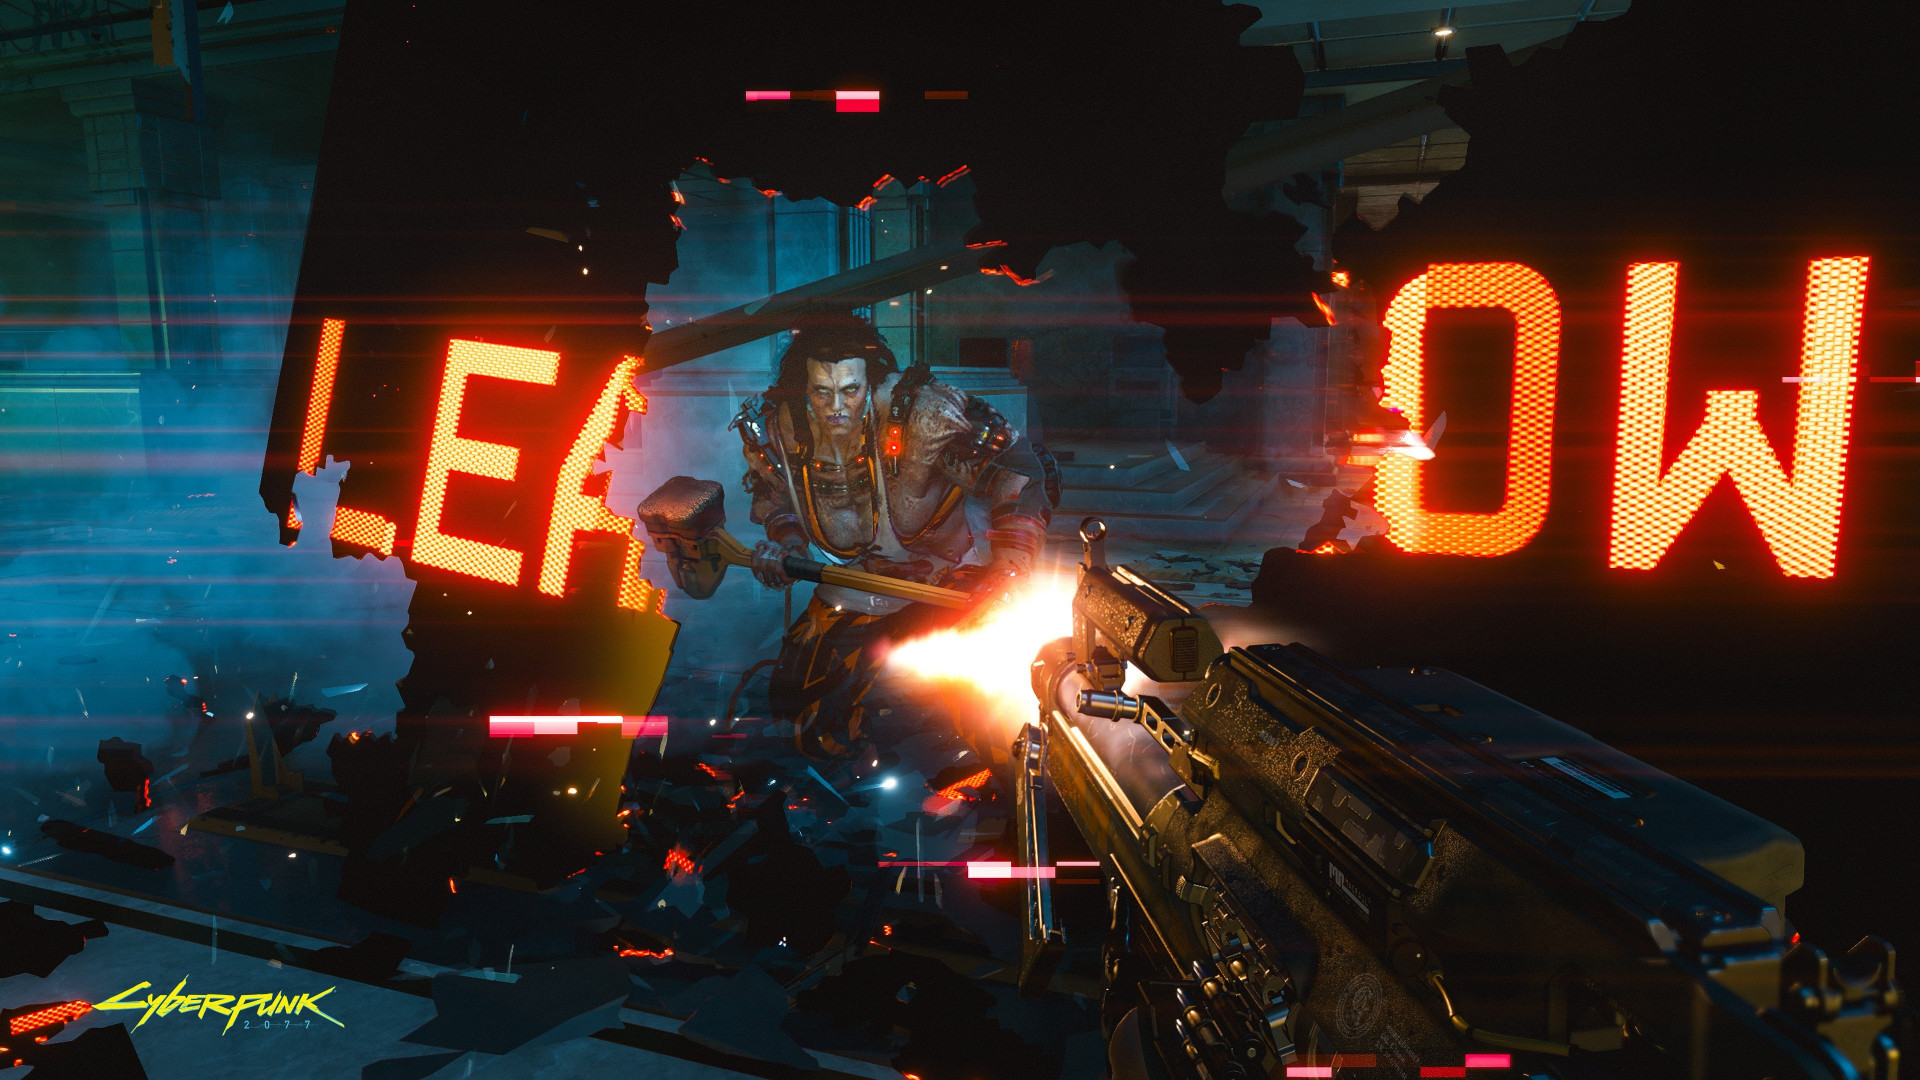 Someone Leaked 20 Minutes Footage of Cyberpunk 2077